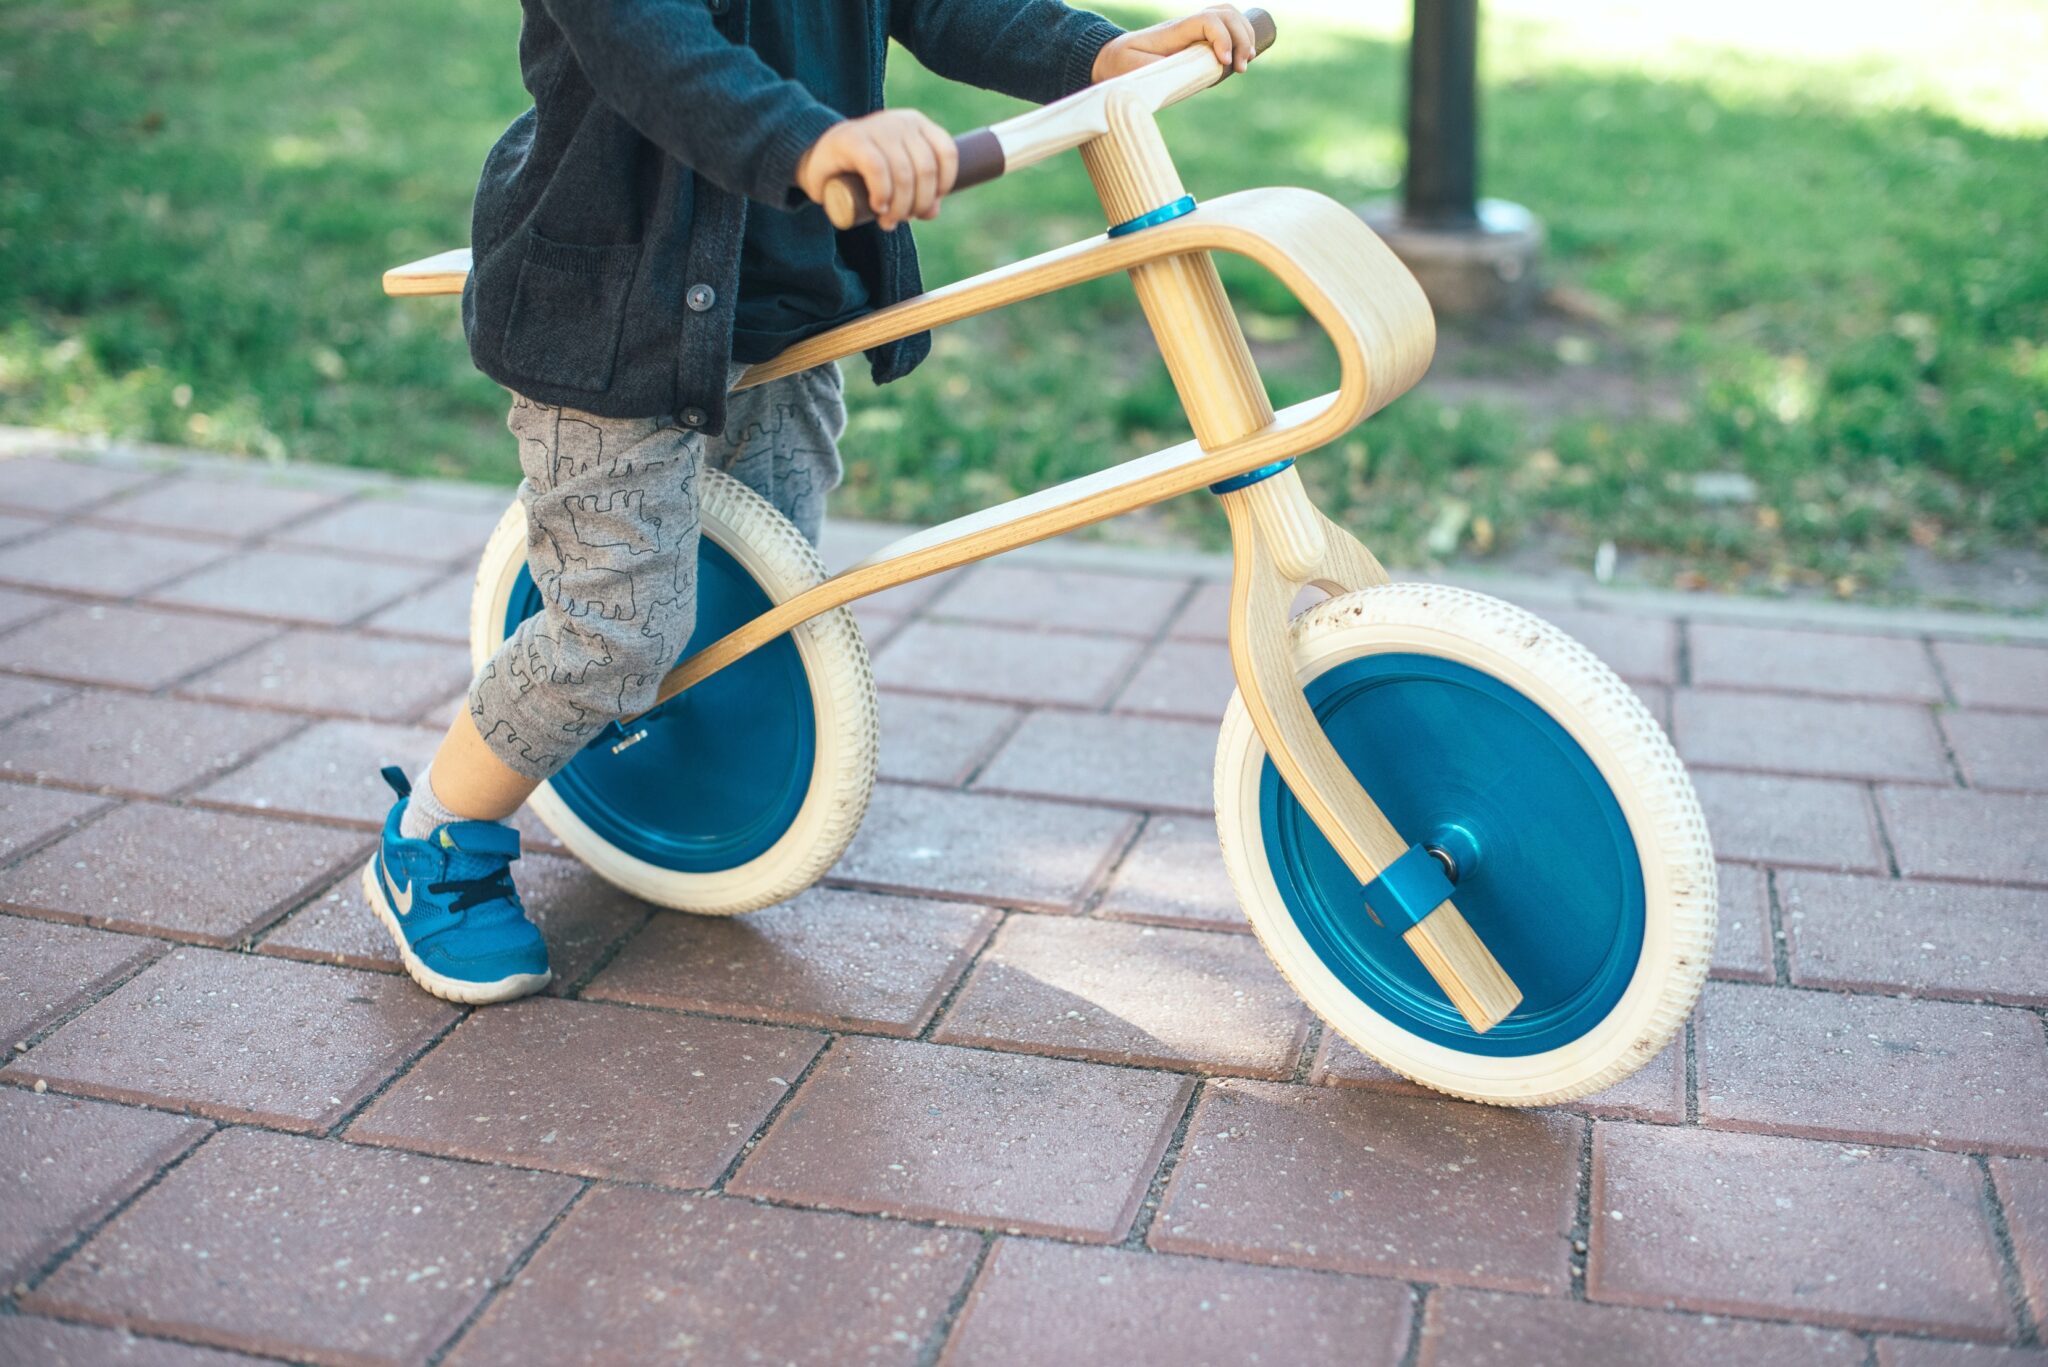 A close up of a little boy with blue Nike shoes, sitting on a wood and blue balance bike.